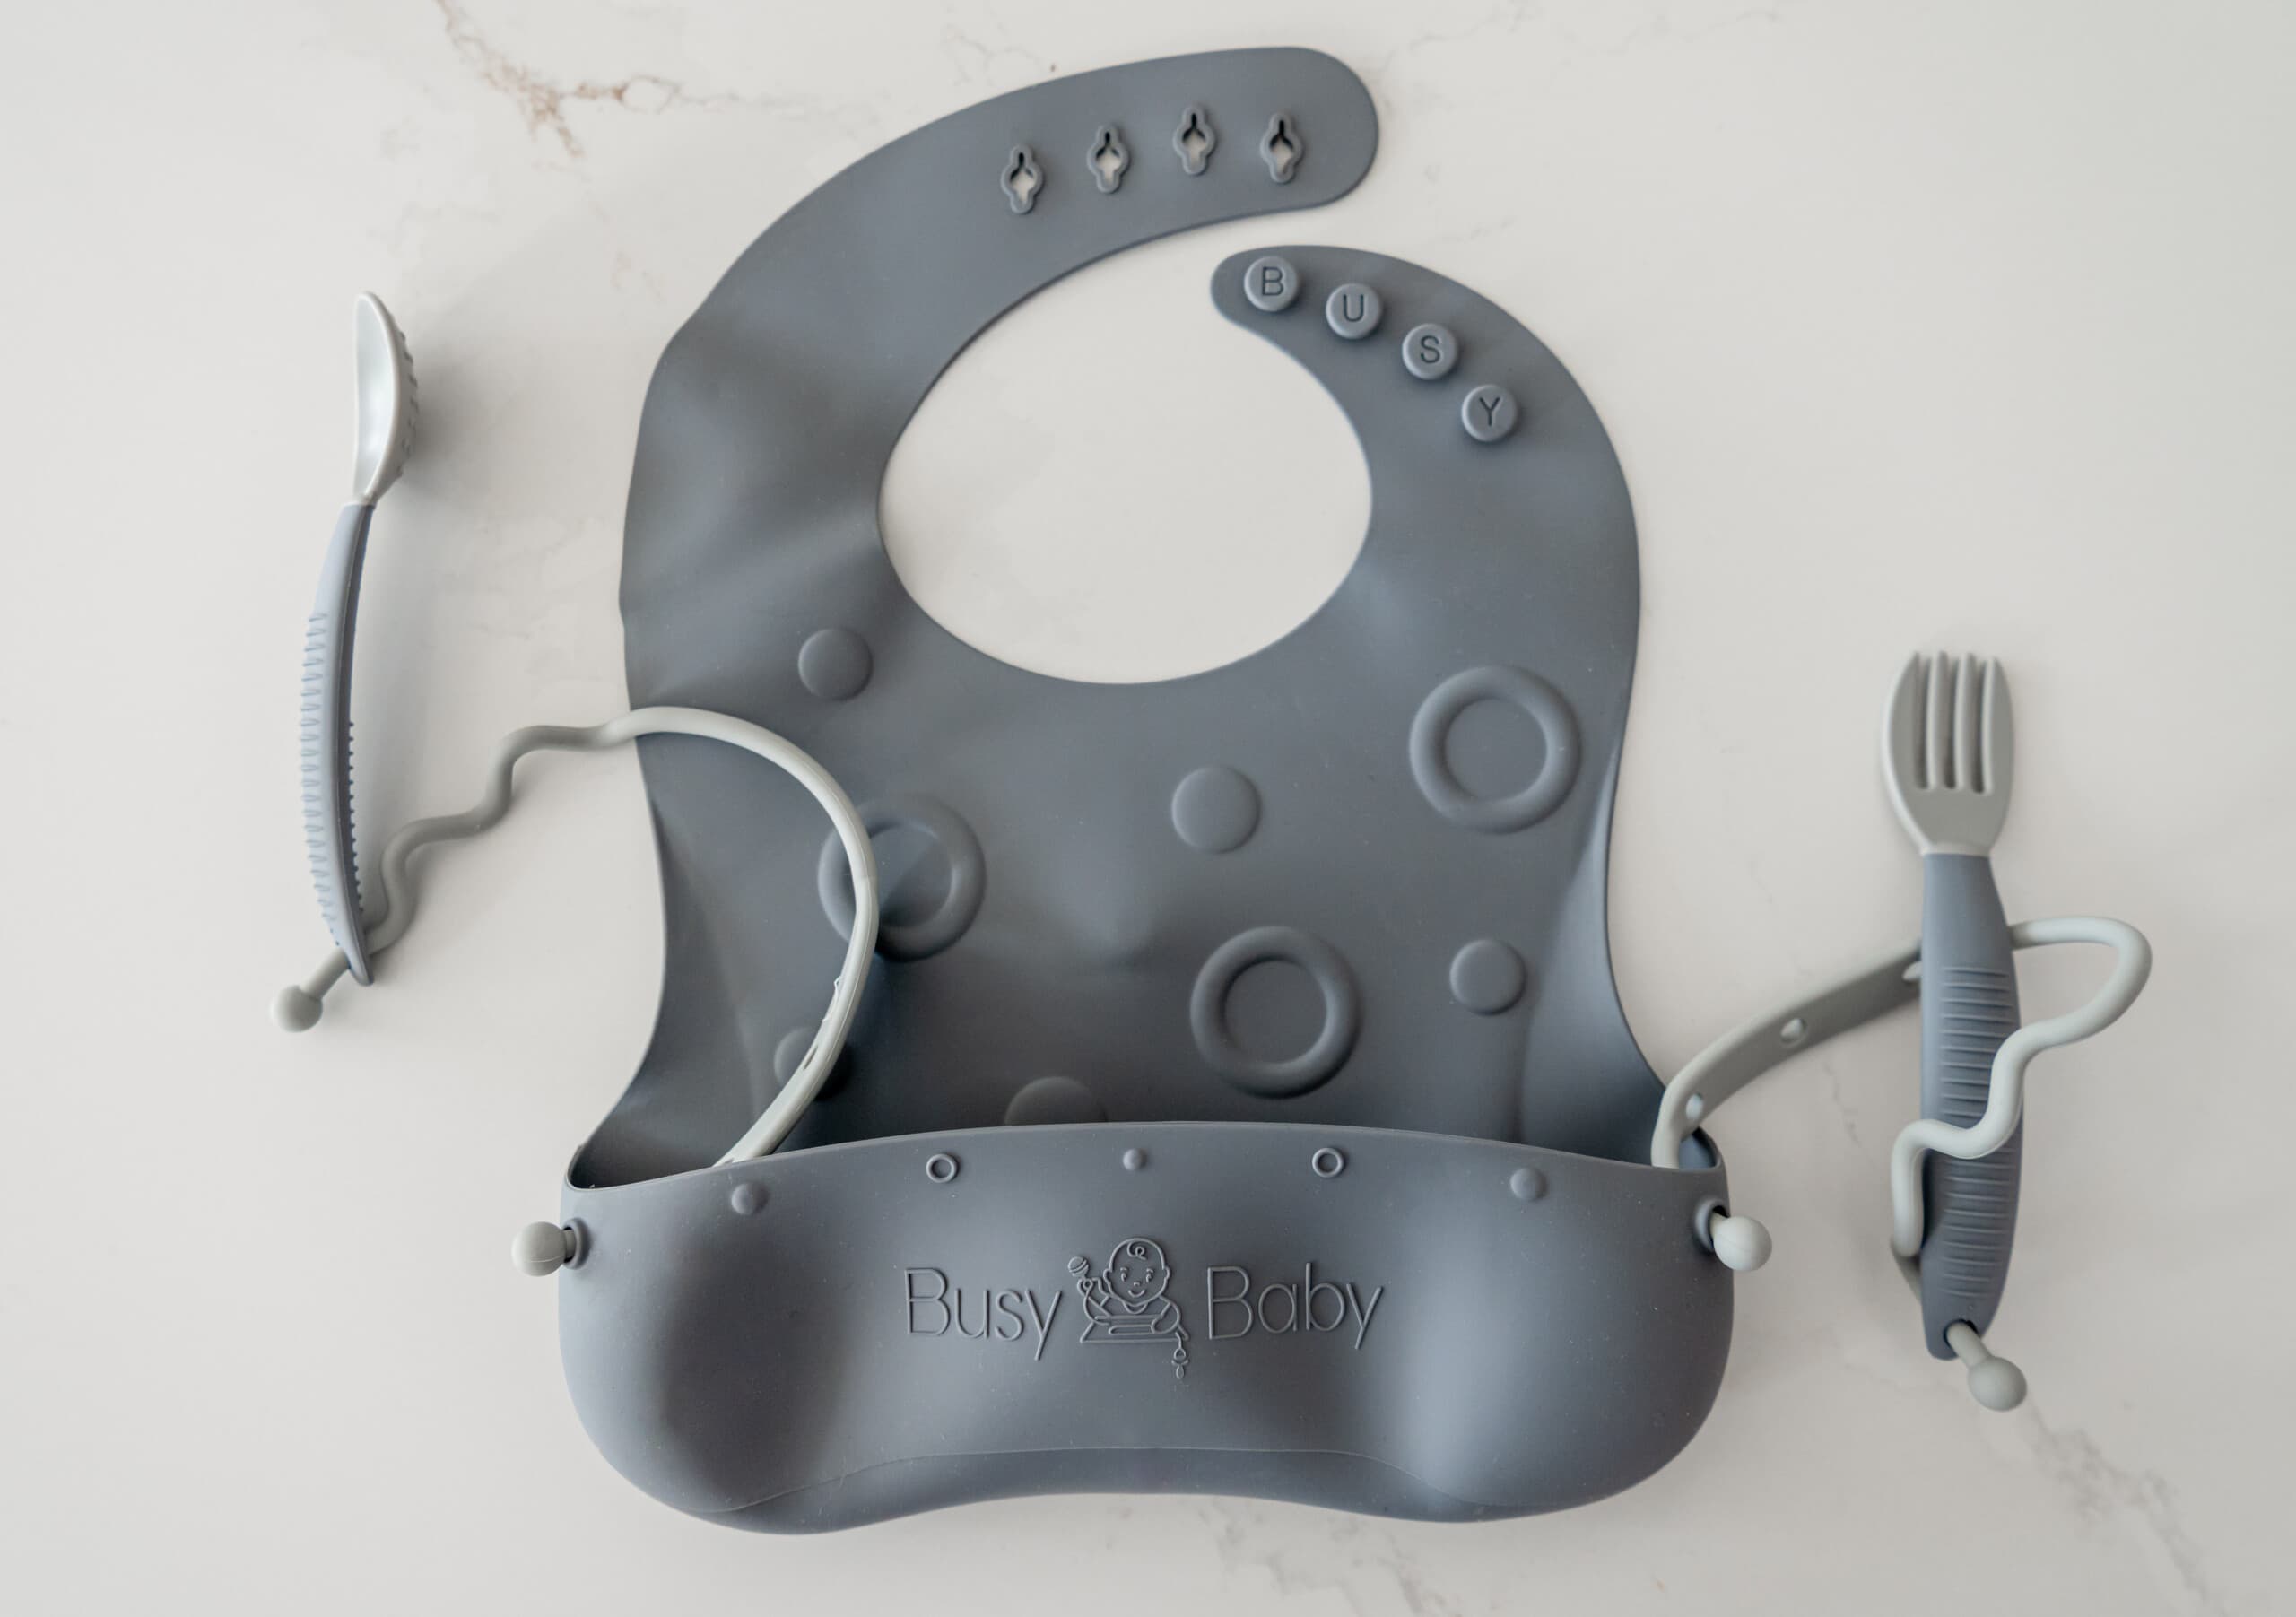 Busy Baby bib and tethered utensils